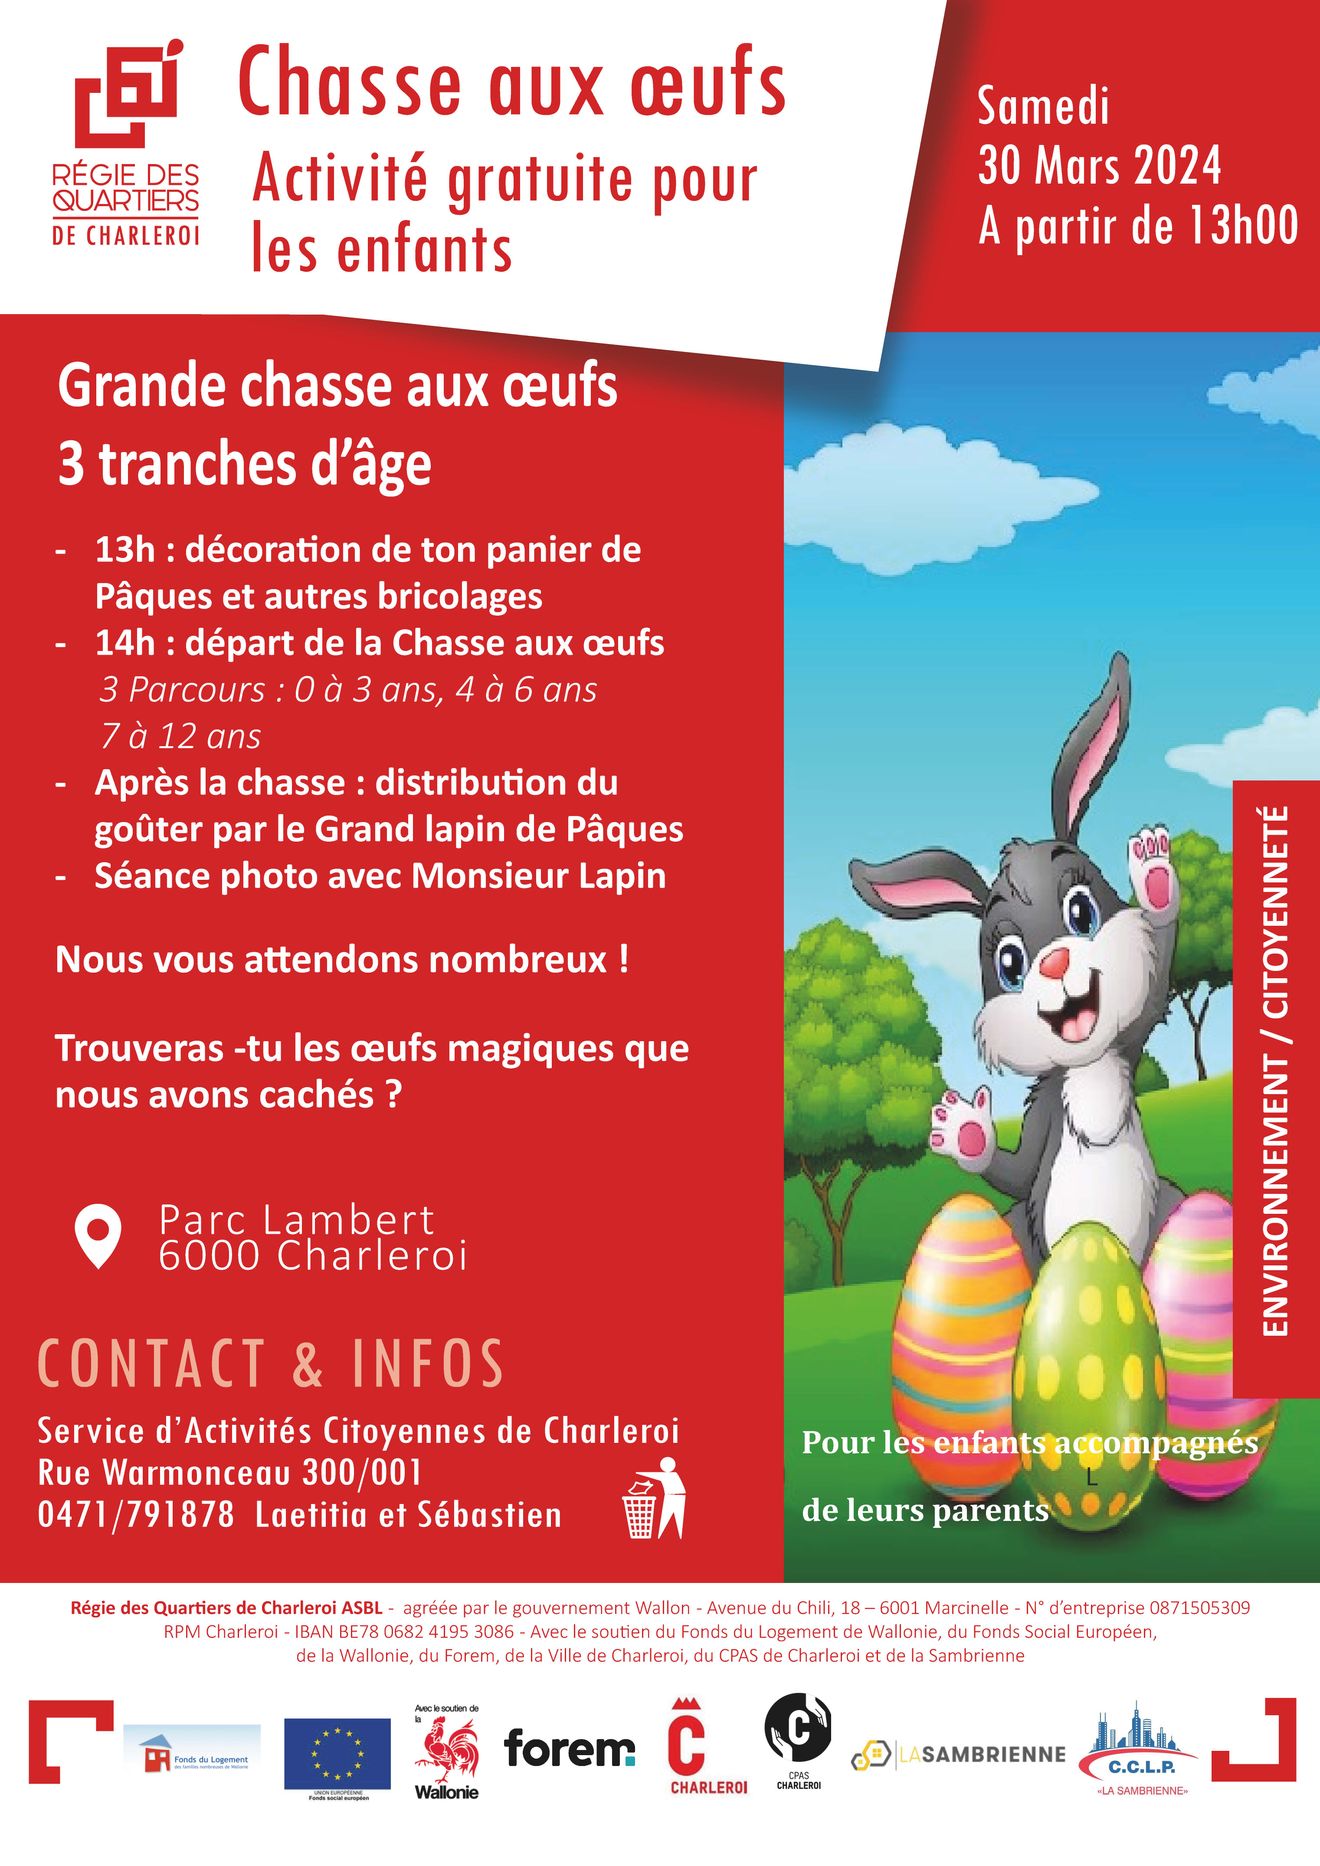 chasse aux oeufs charleroi 